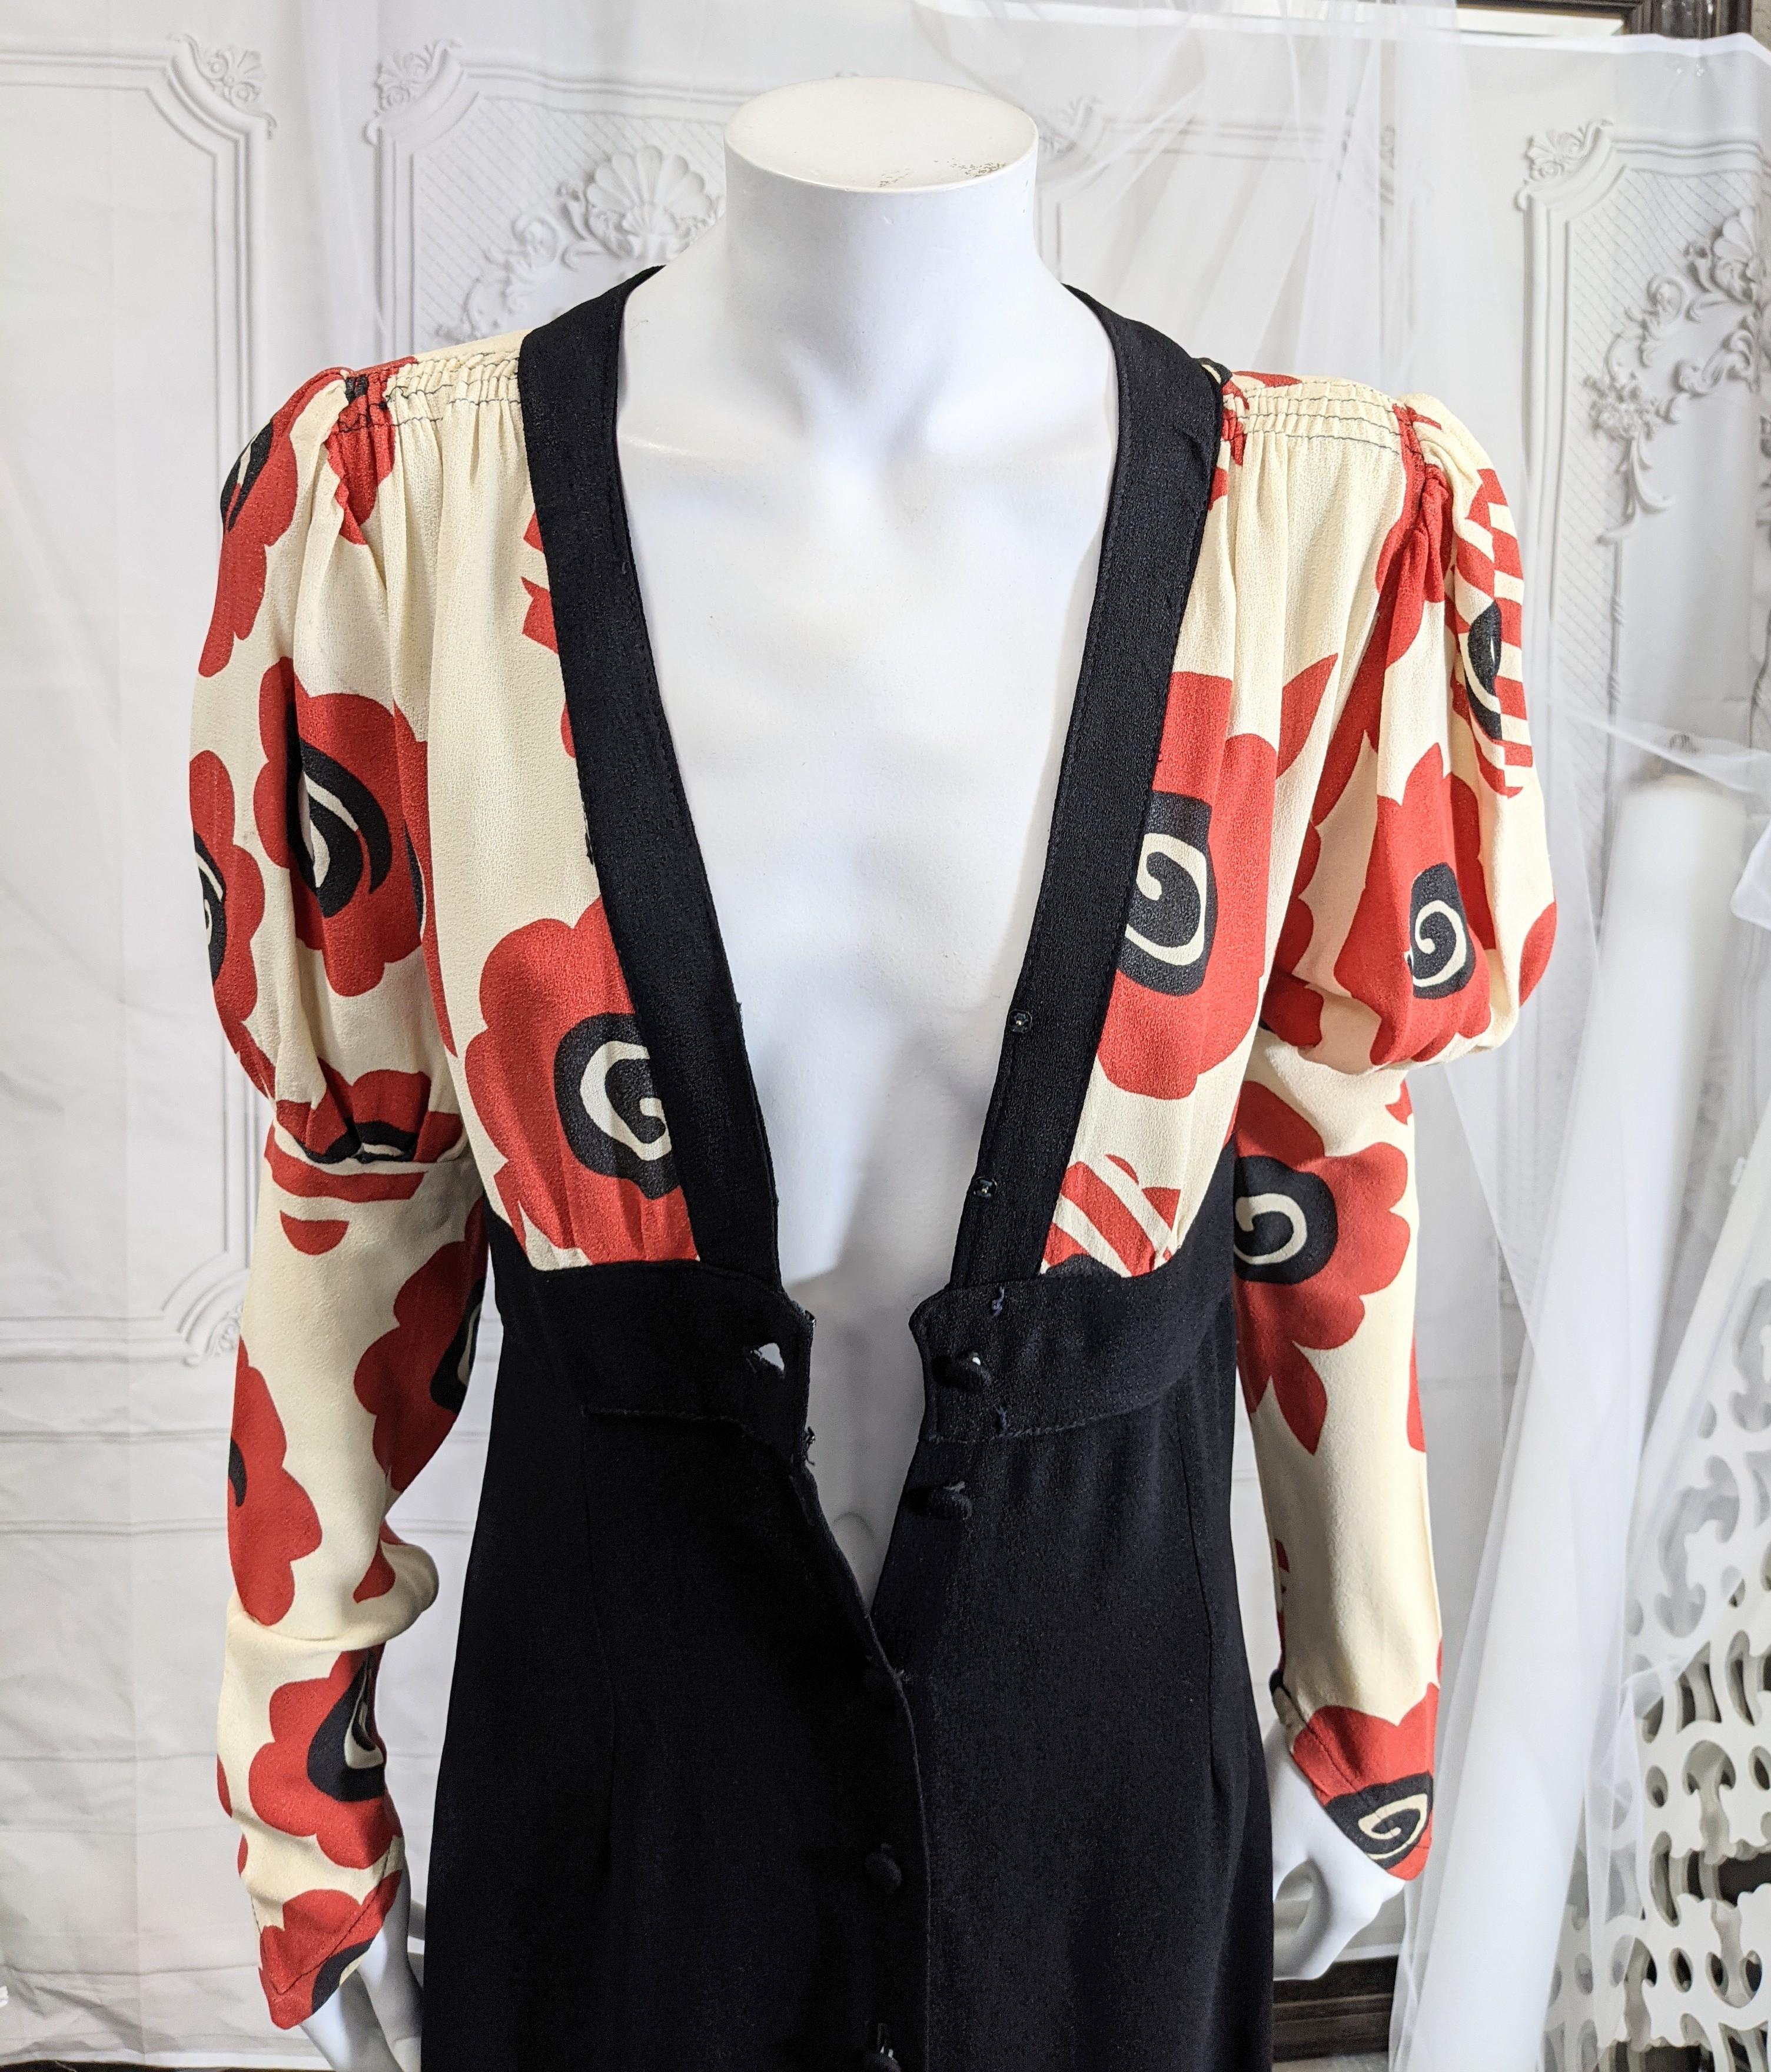 Ossie Clark Iconic Poppy Print Day Dress In Excellent Condition For Sale In New York, NY